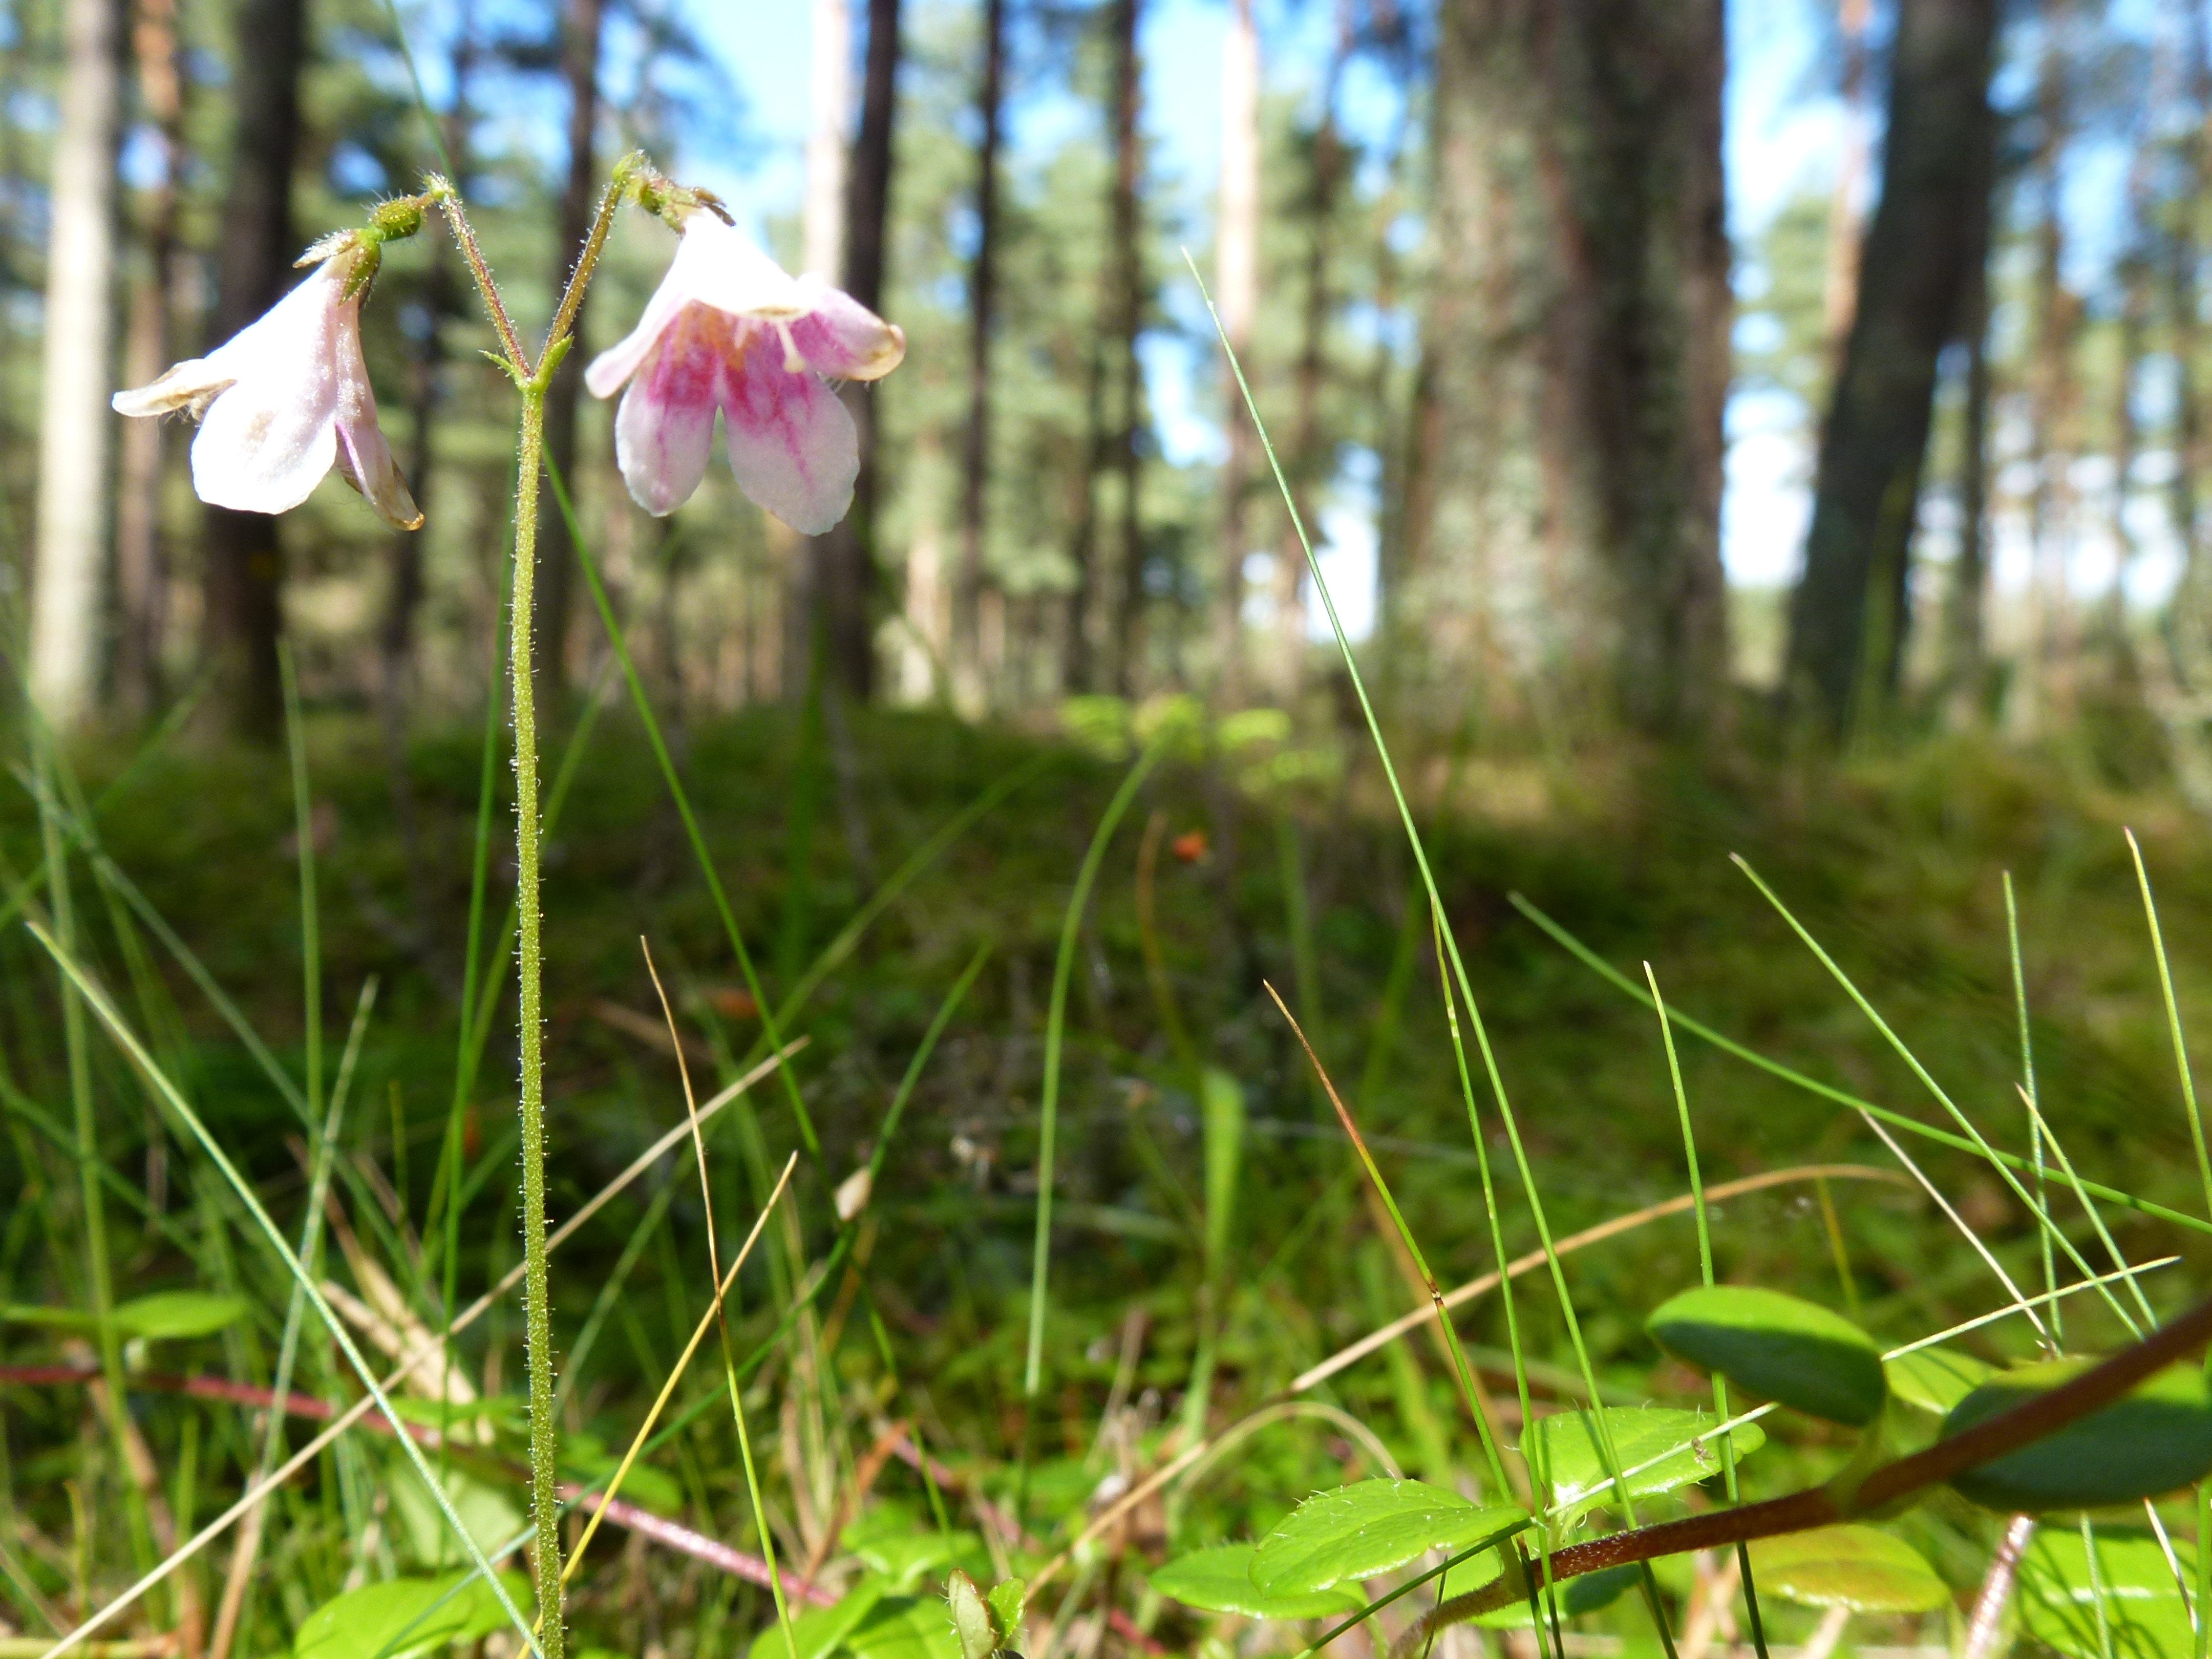 Twinflowers are among the threatened plants the project hopes to help